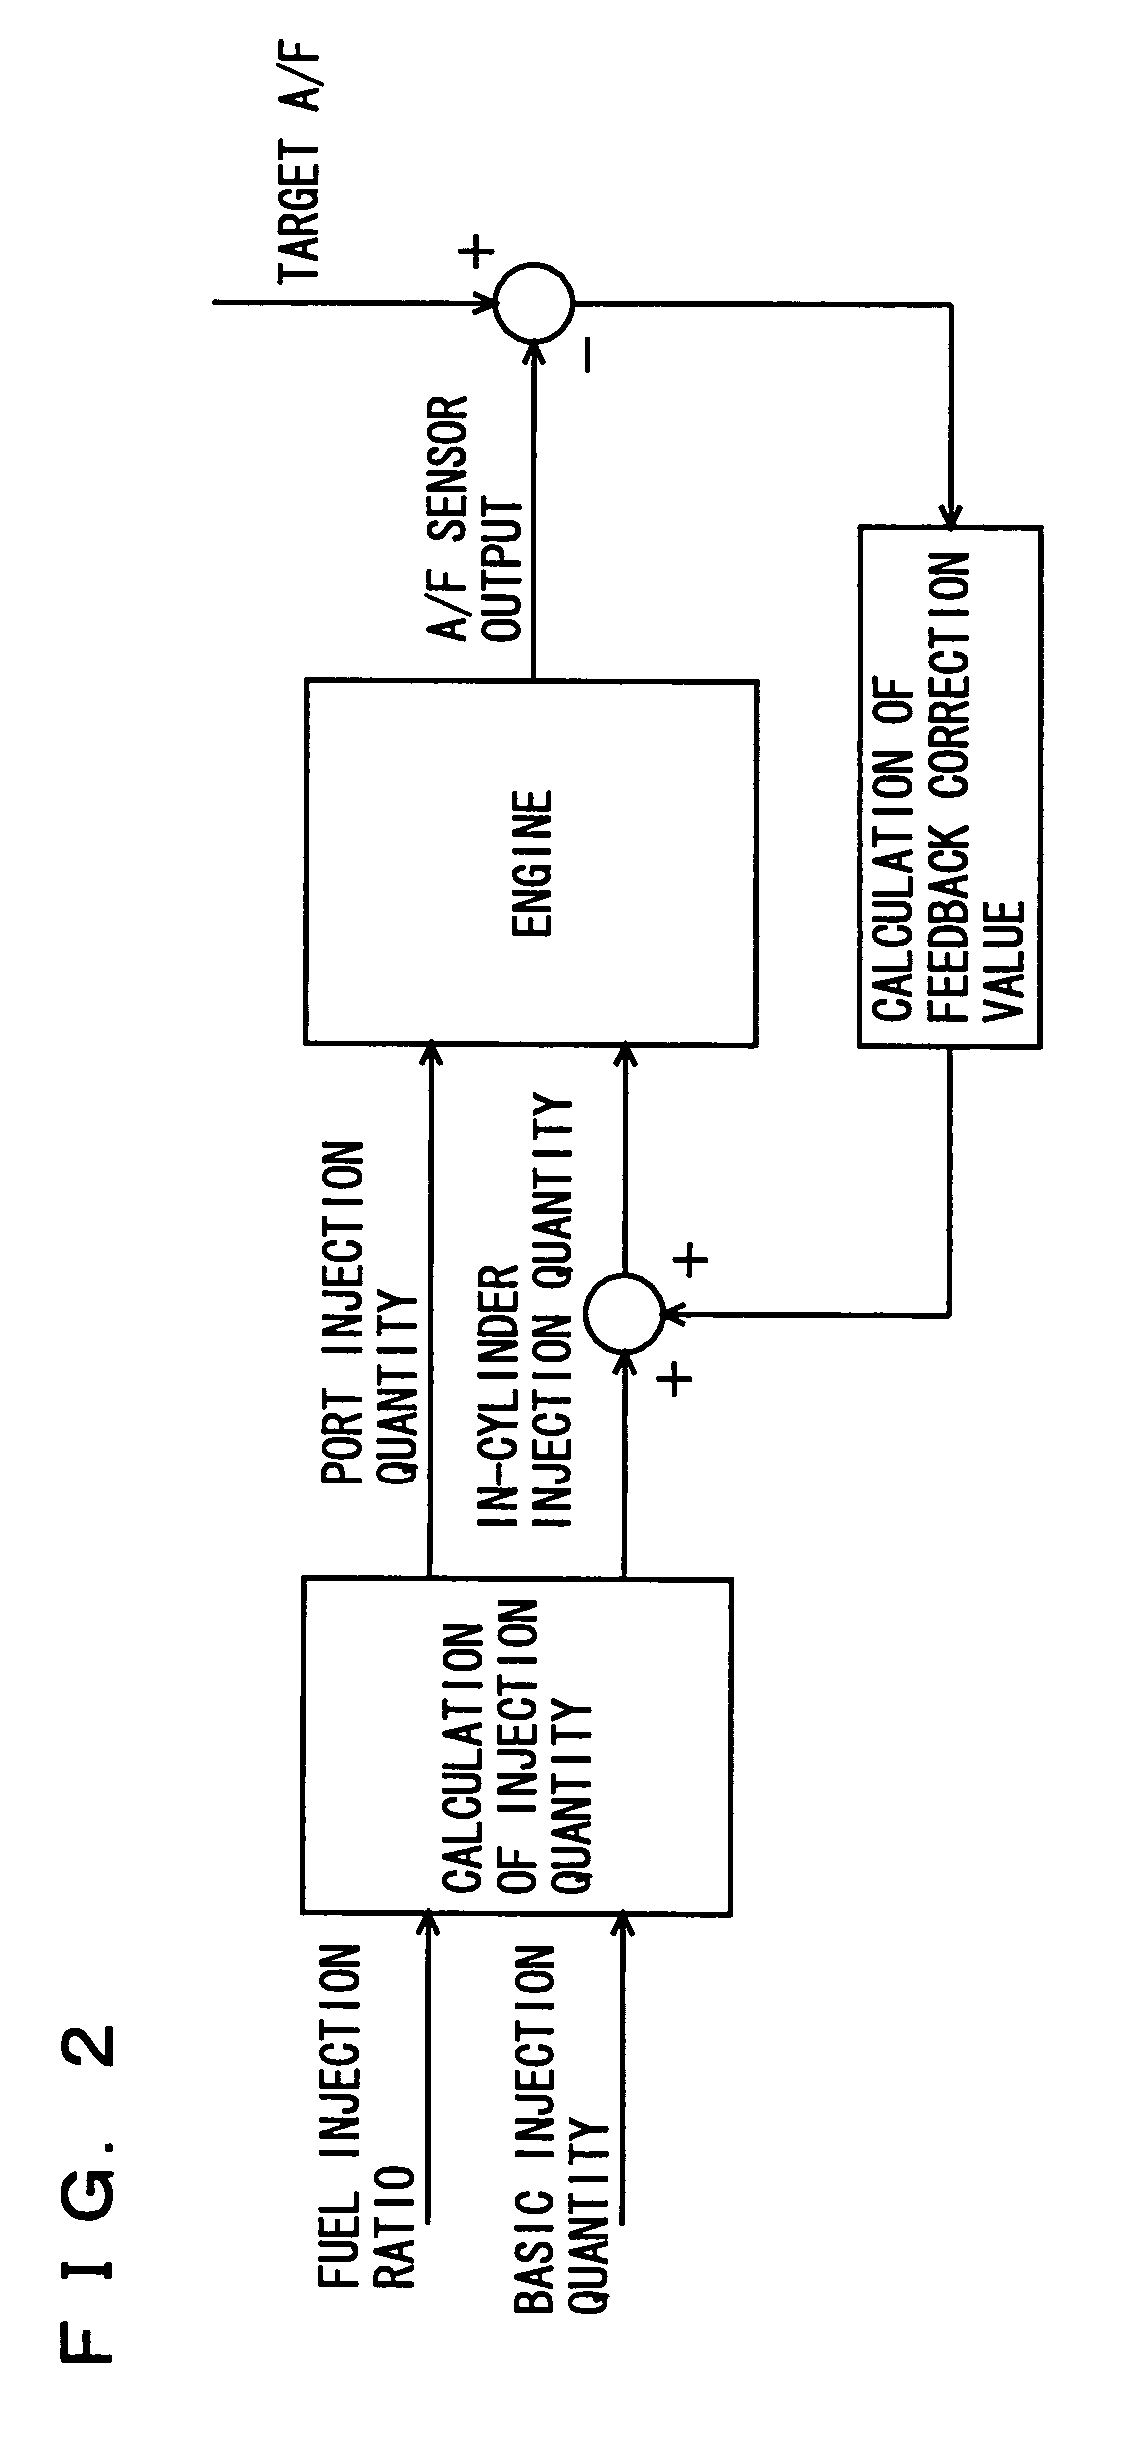 Control apparatus for internal combustion engine